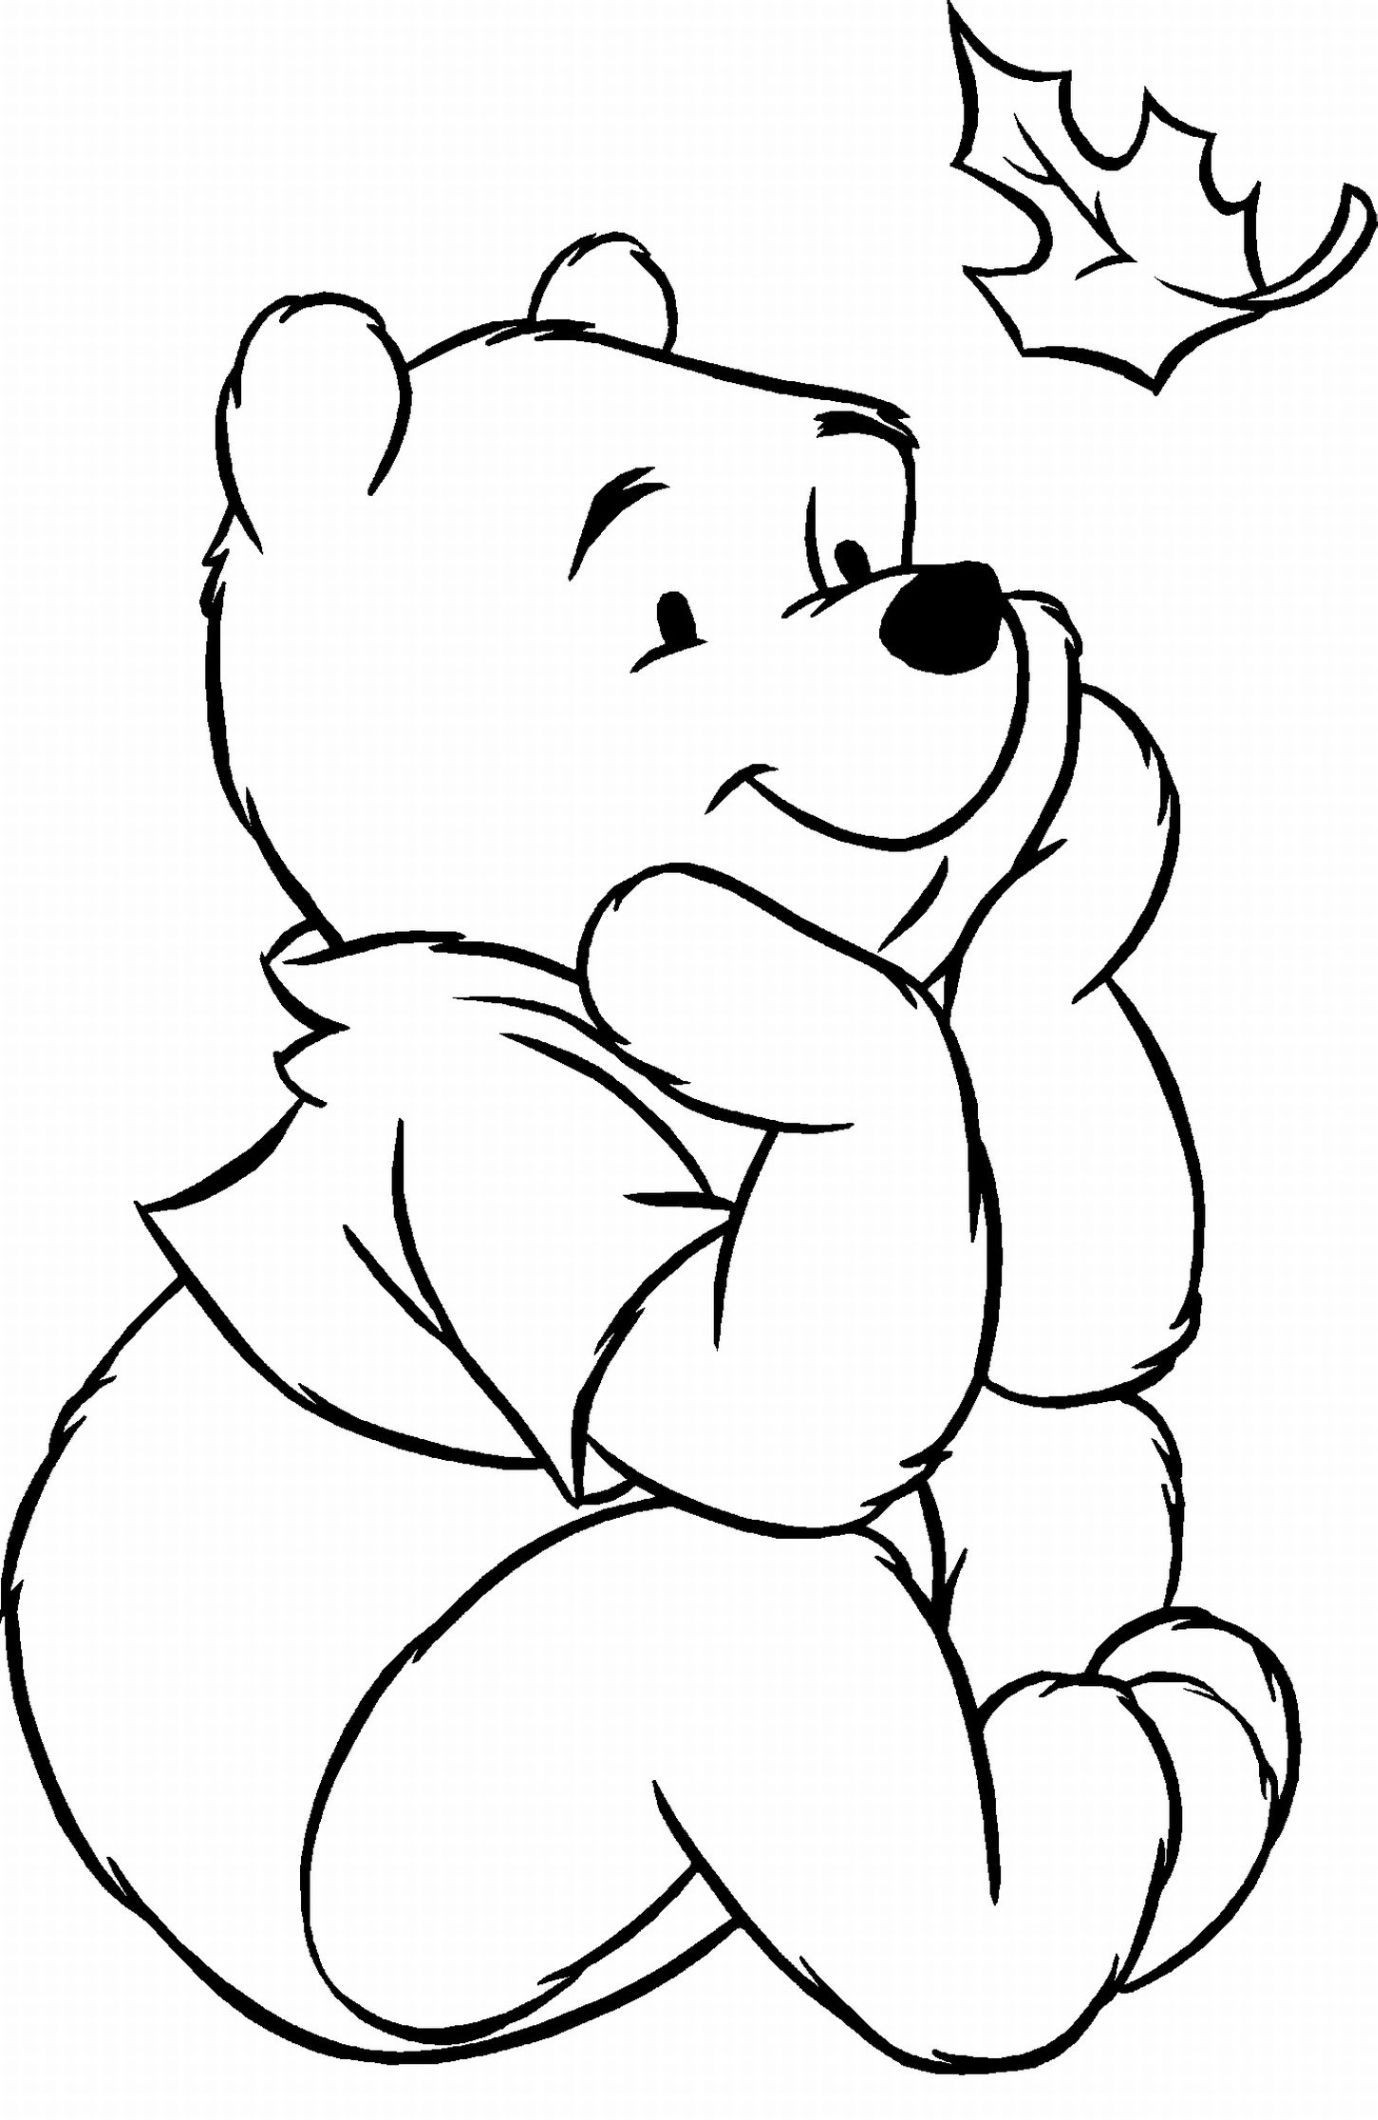 Disney Coloring Pages For Kids To Print Out
 Free Coloring Pages Disney For Kids Image 3